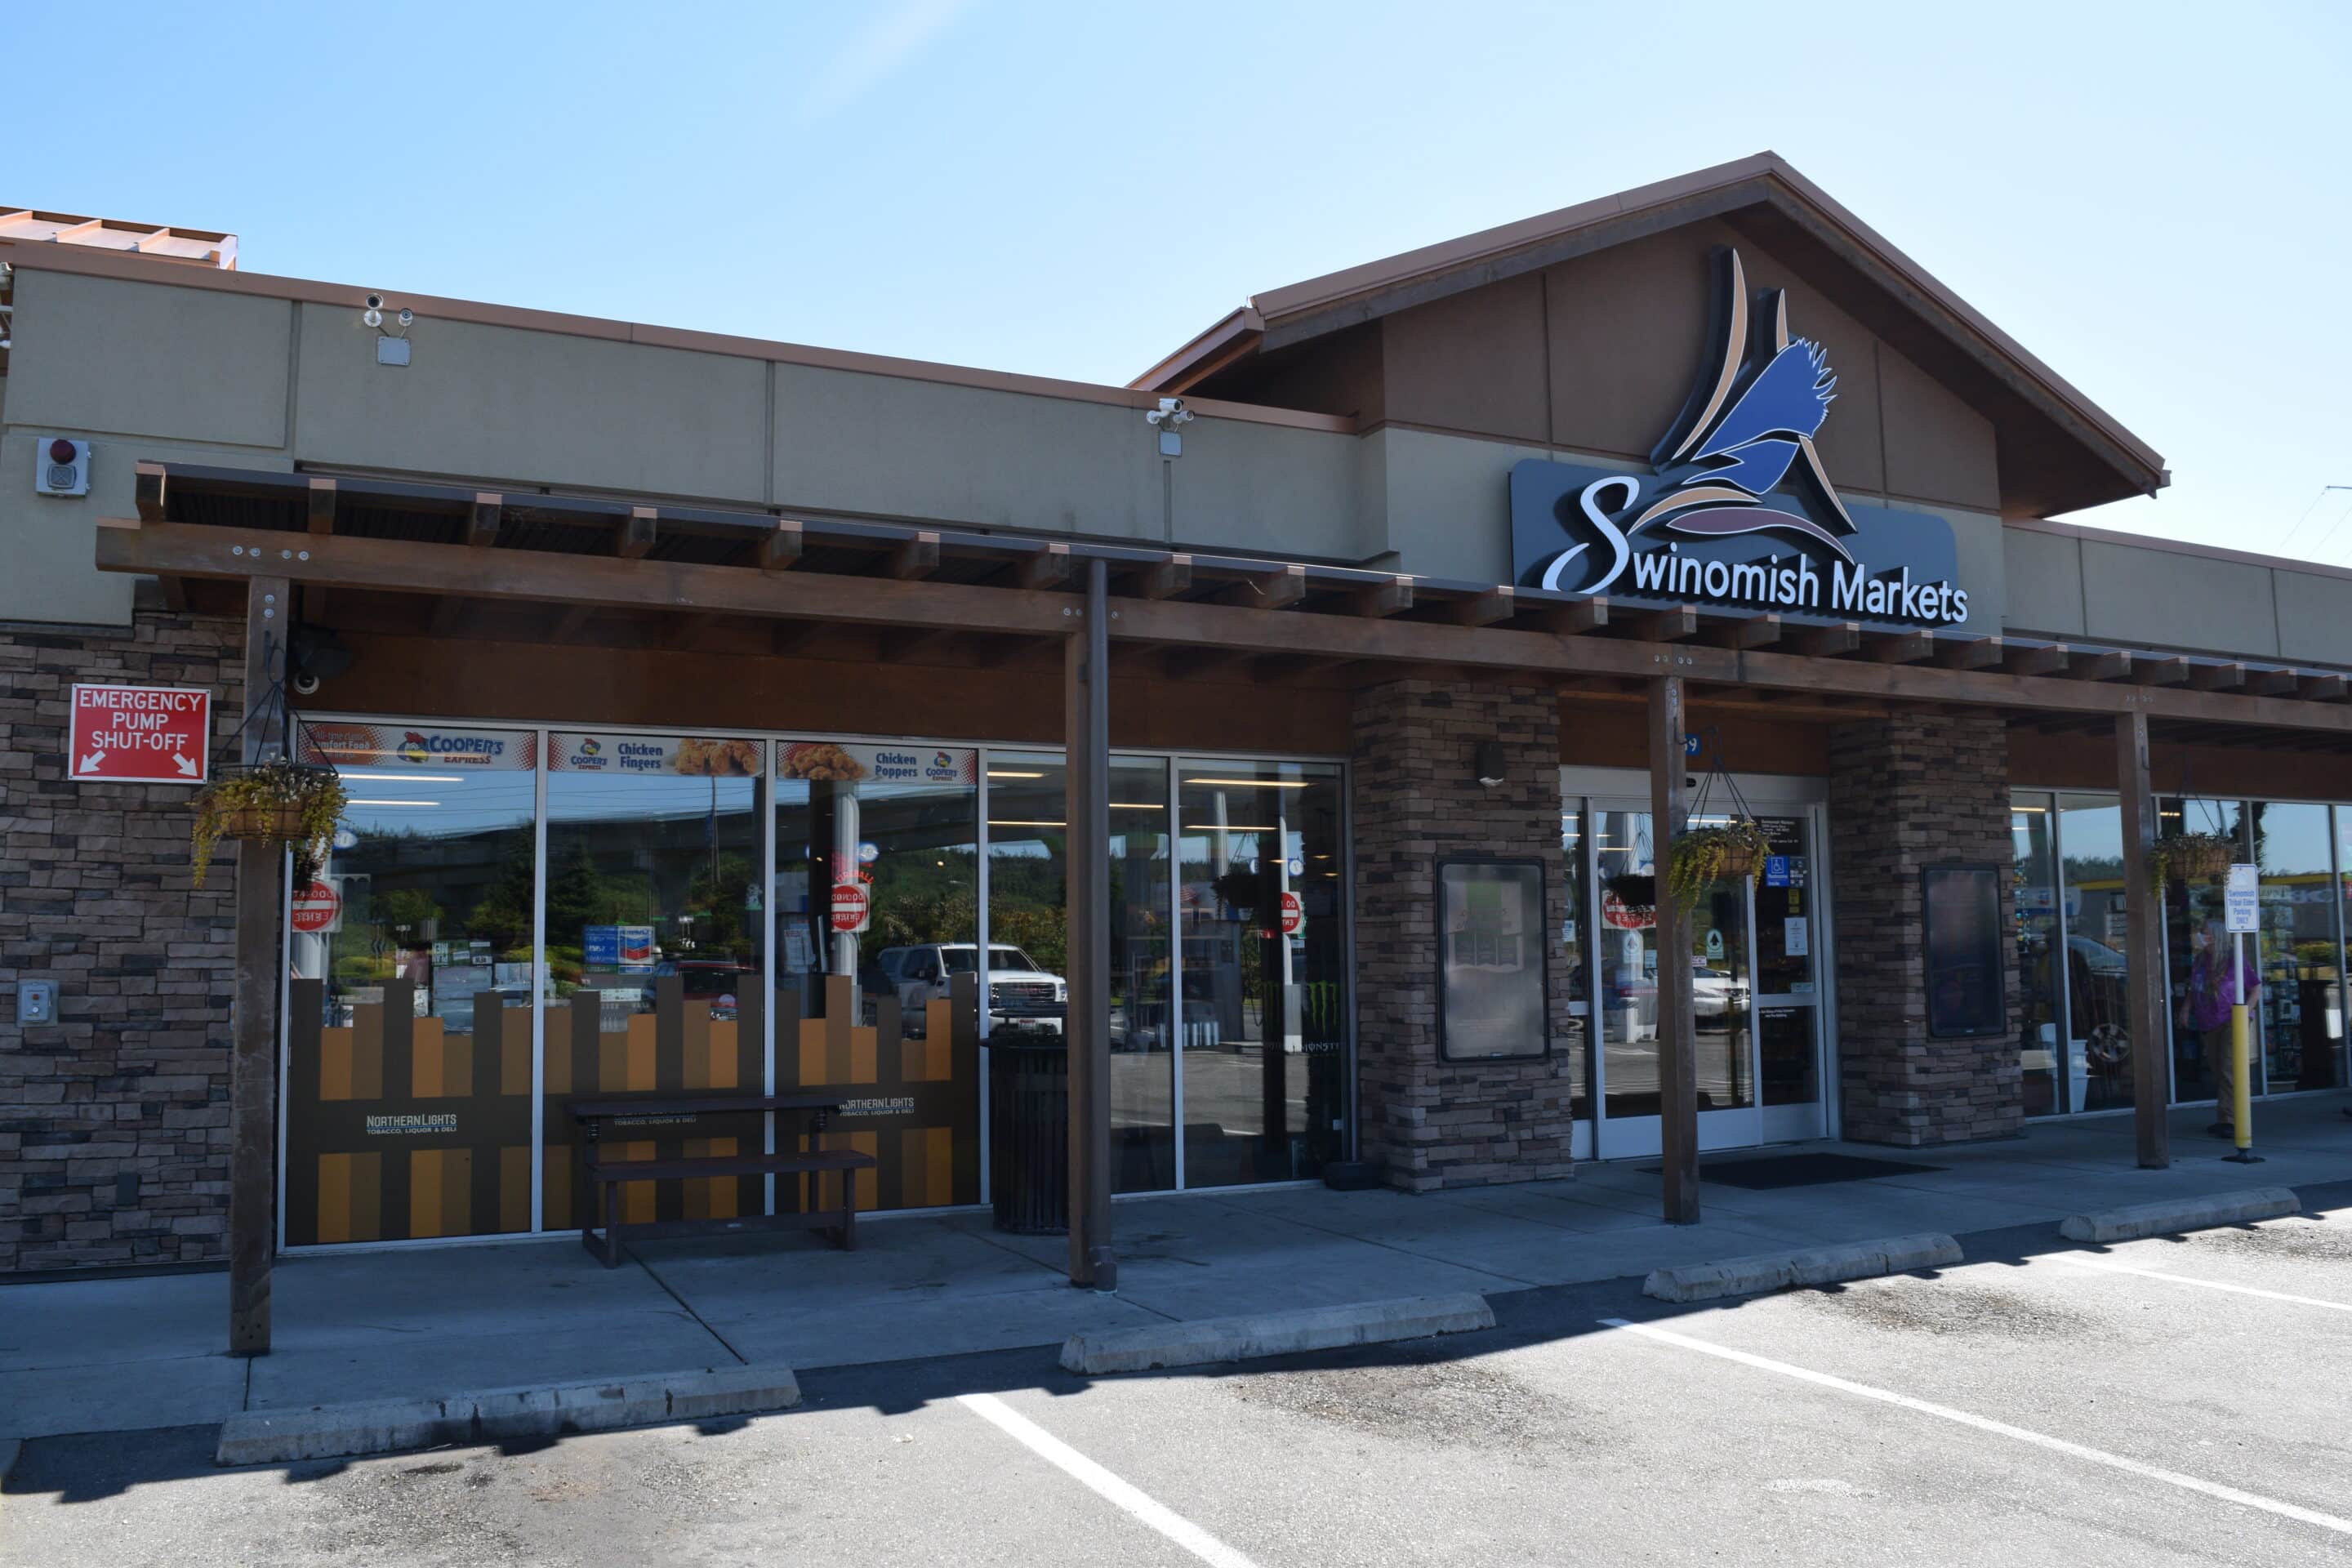 Swinomish Markets In Skagit County Offer Three Convenient Locations to Fuel Your Fun